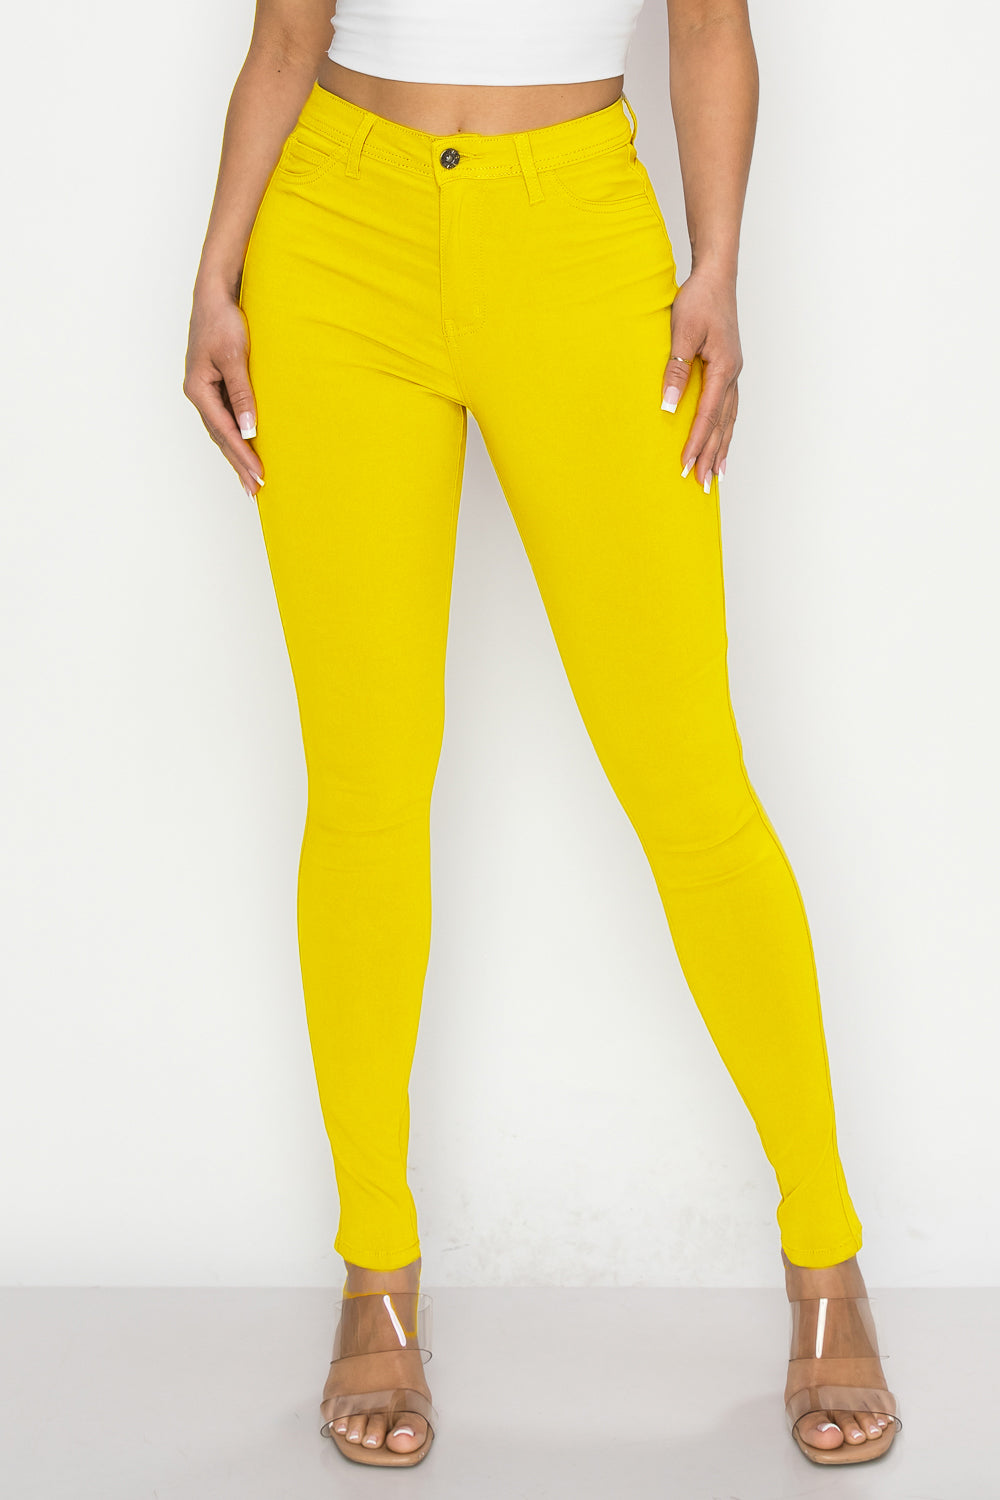 HIGH WAISTED COLORED SUPER-STRETCH JEANS YELLOW - LOVER BRAND FASHION